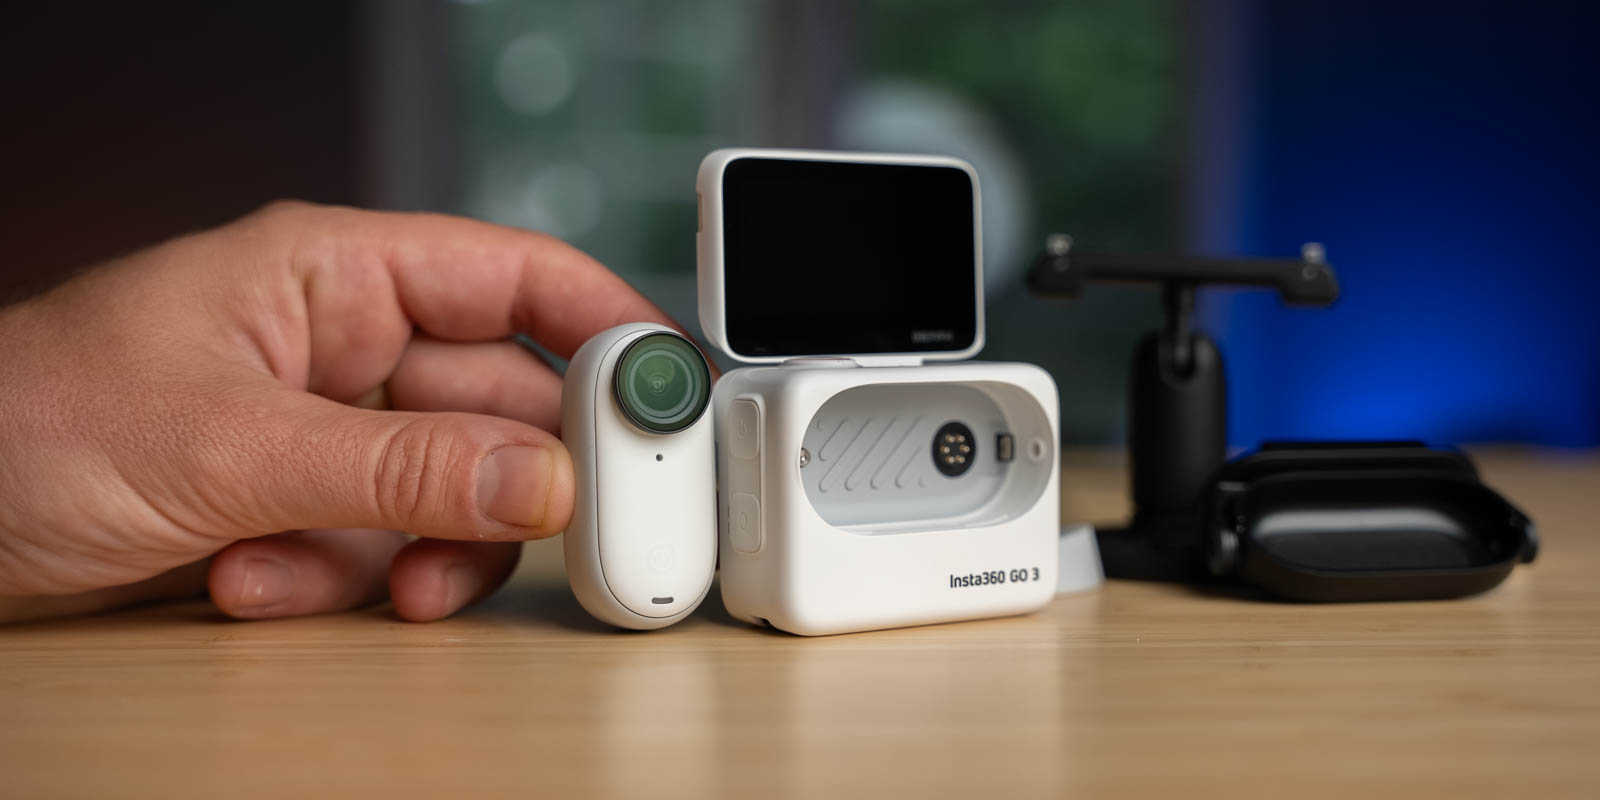 Insta360 Go thumb-sized action camera review